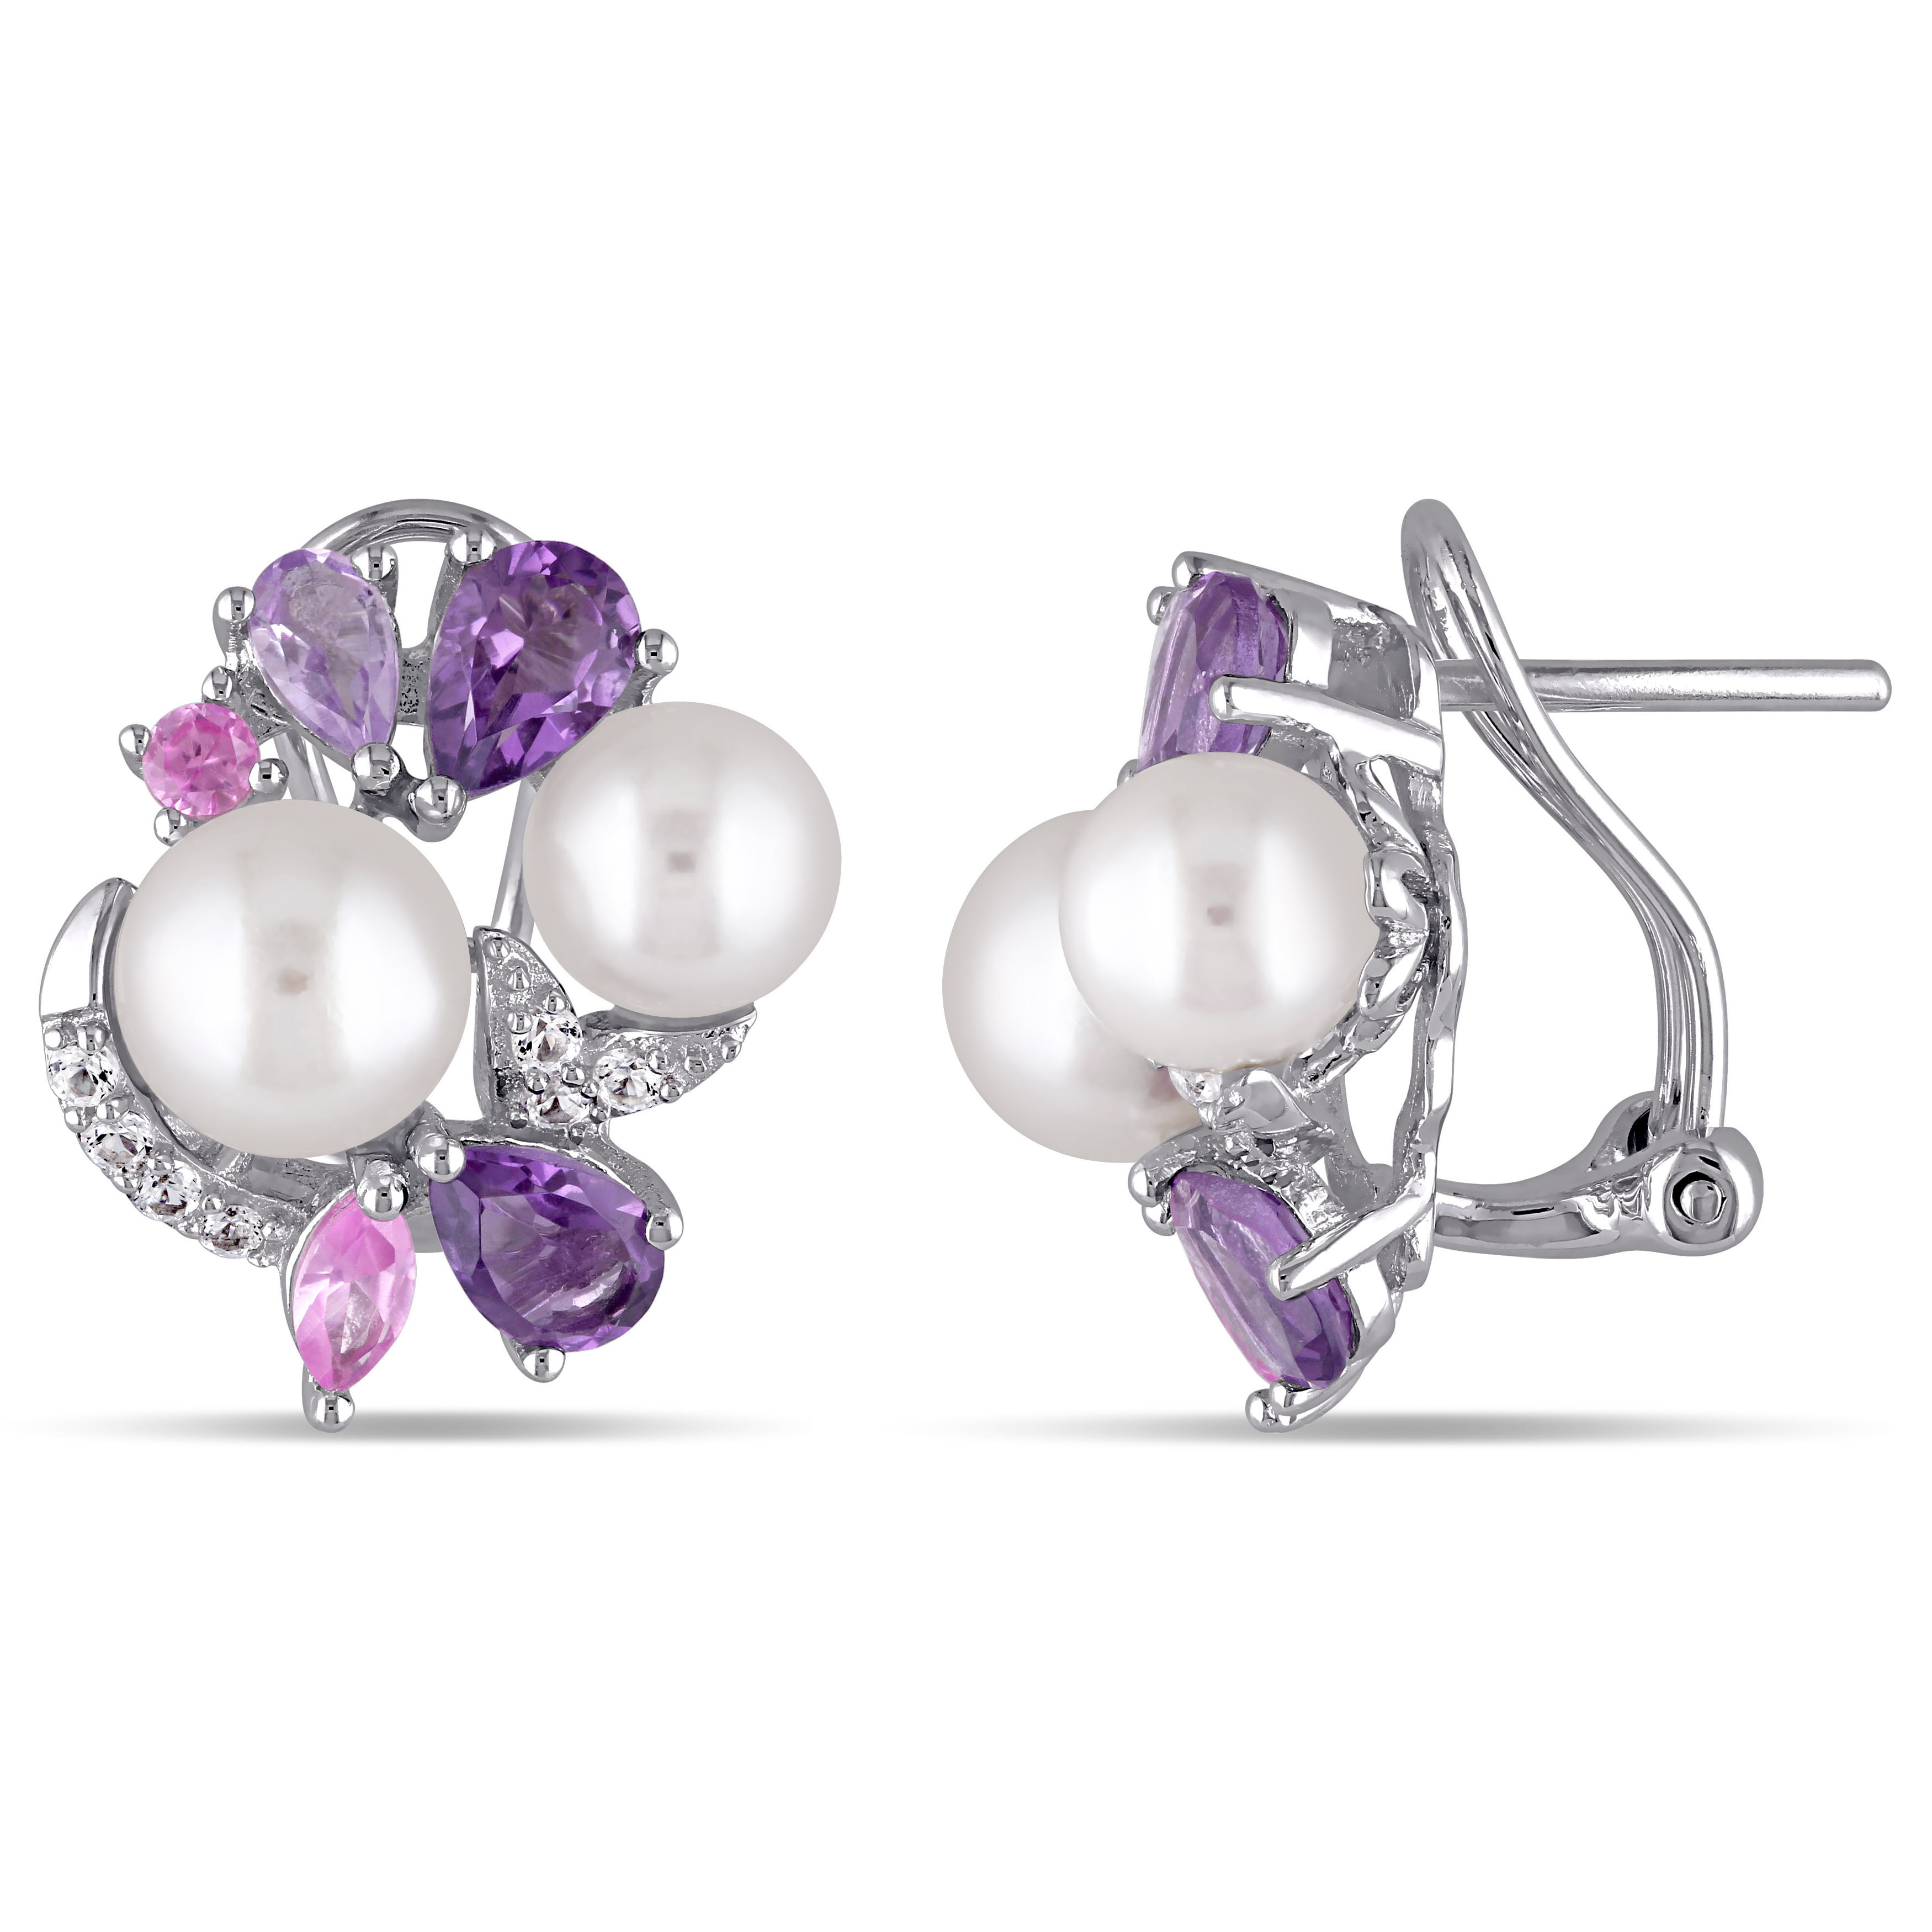 2 3/4 CT TGW Amethyst, Rose de France, Created Pink and Created White Sapphire and White Cultured Freshwater Pearl Cluster Earrings in Sterling Silver